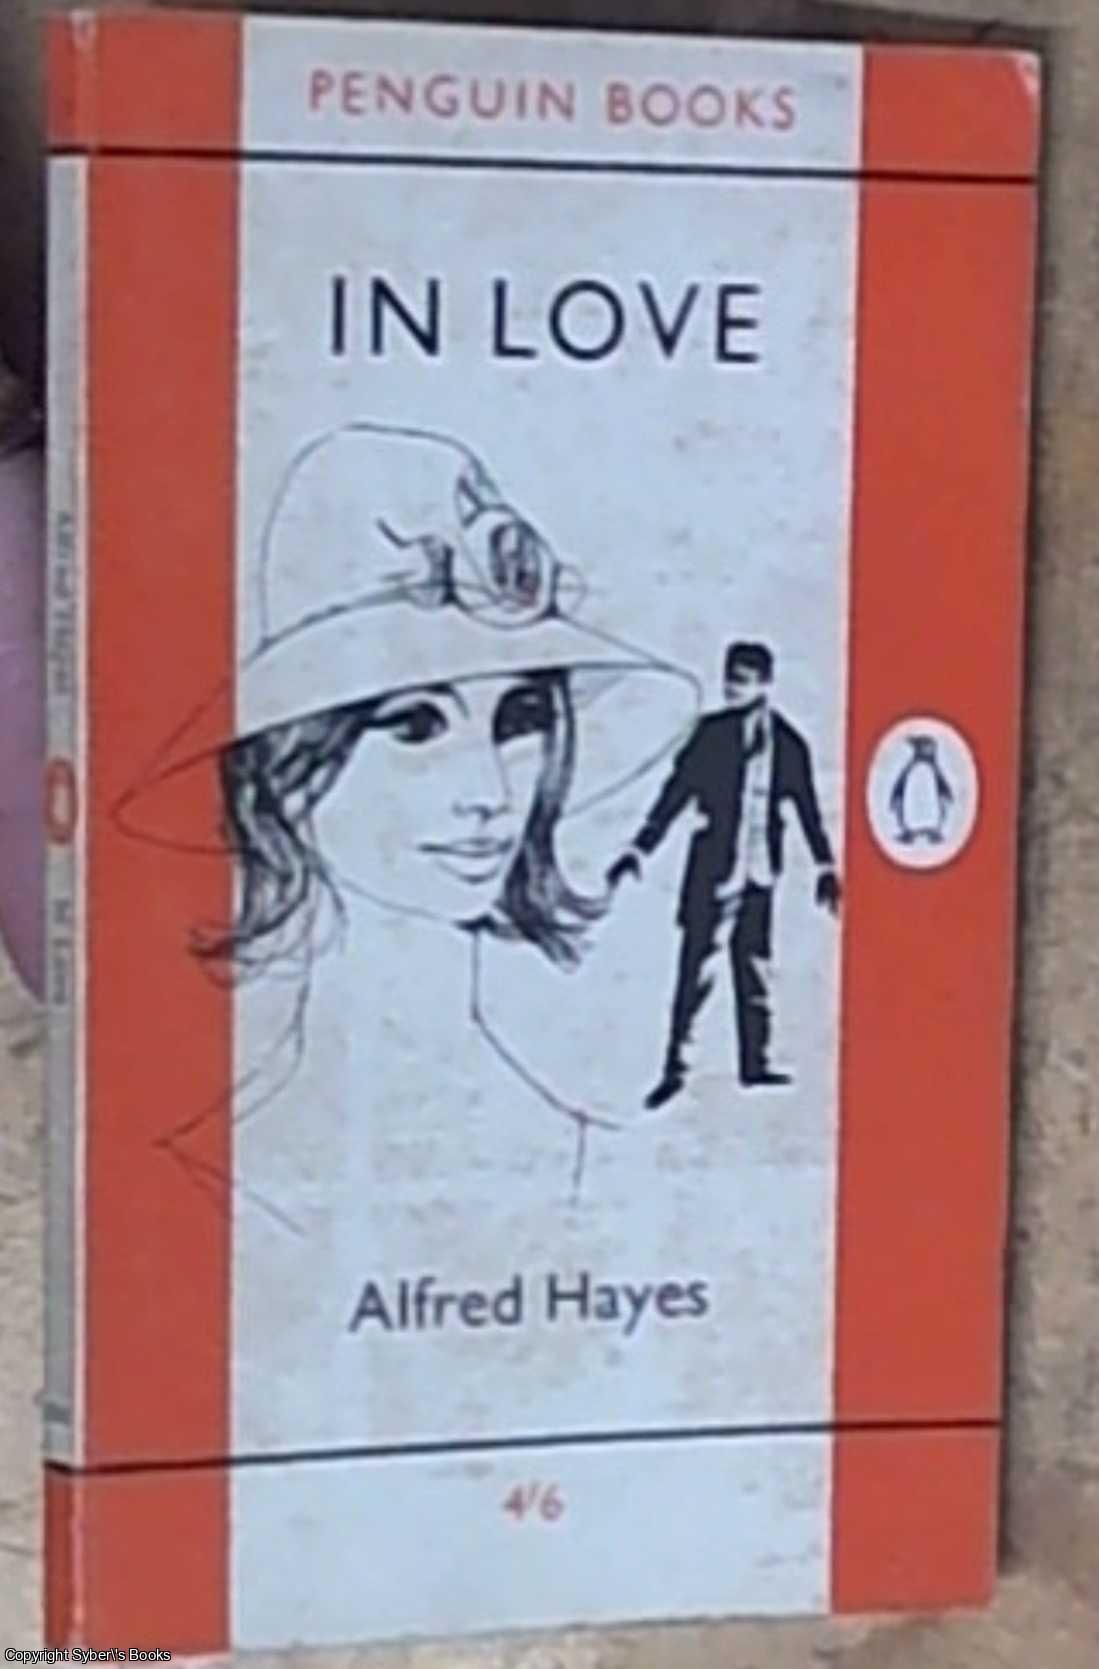 Hayes, Alfred - In Love